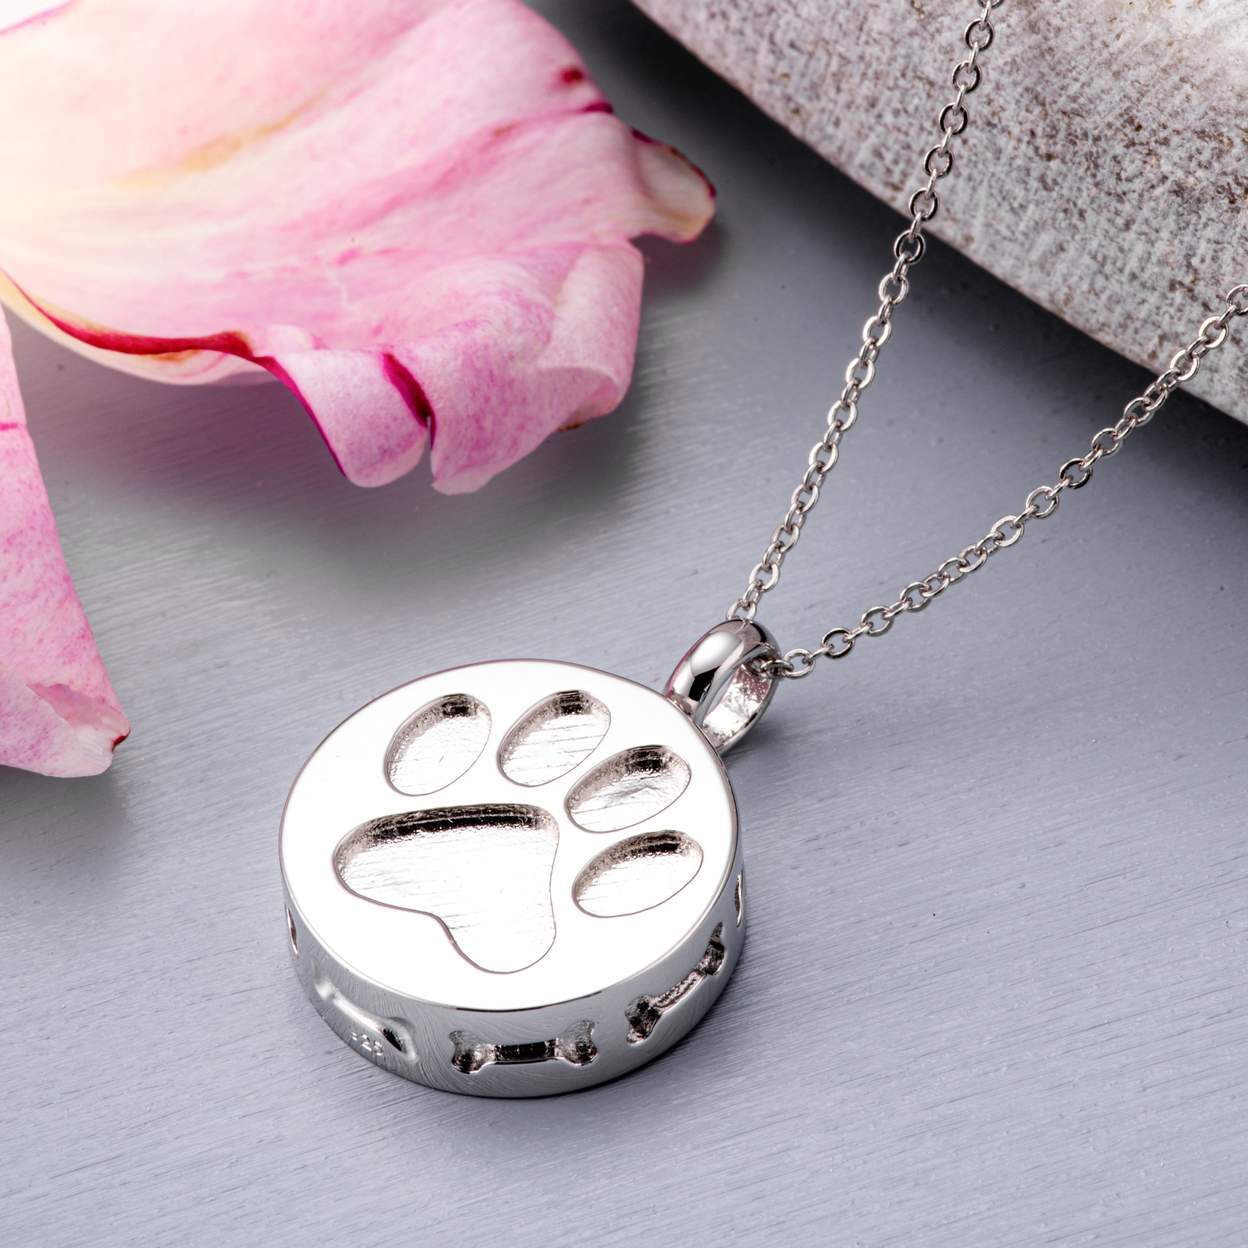 Cremation Ashes Jewellery | Made in the UK